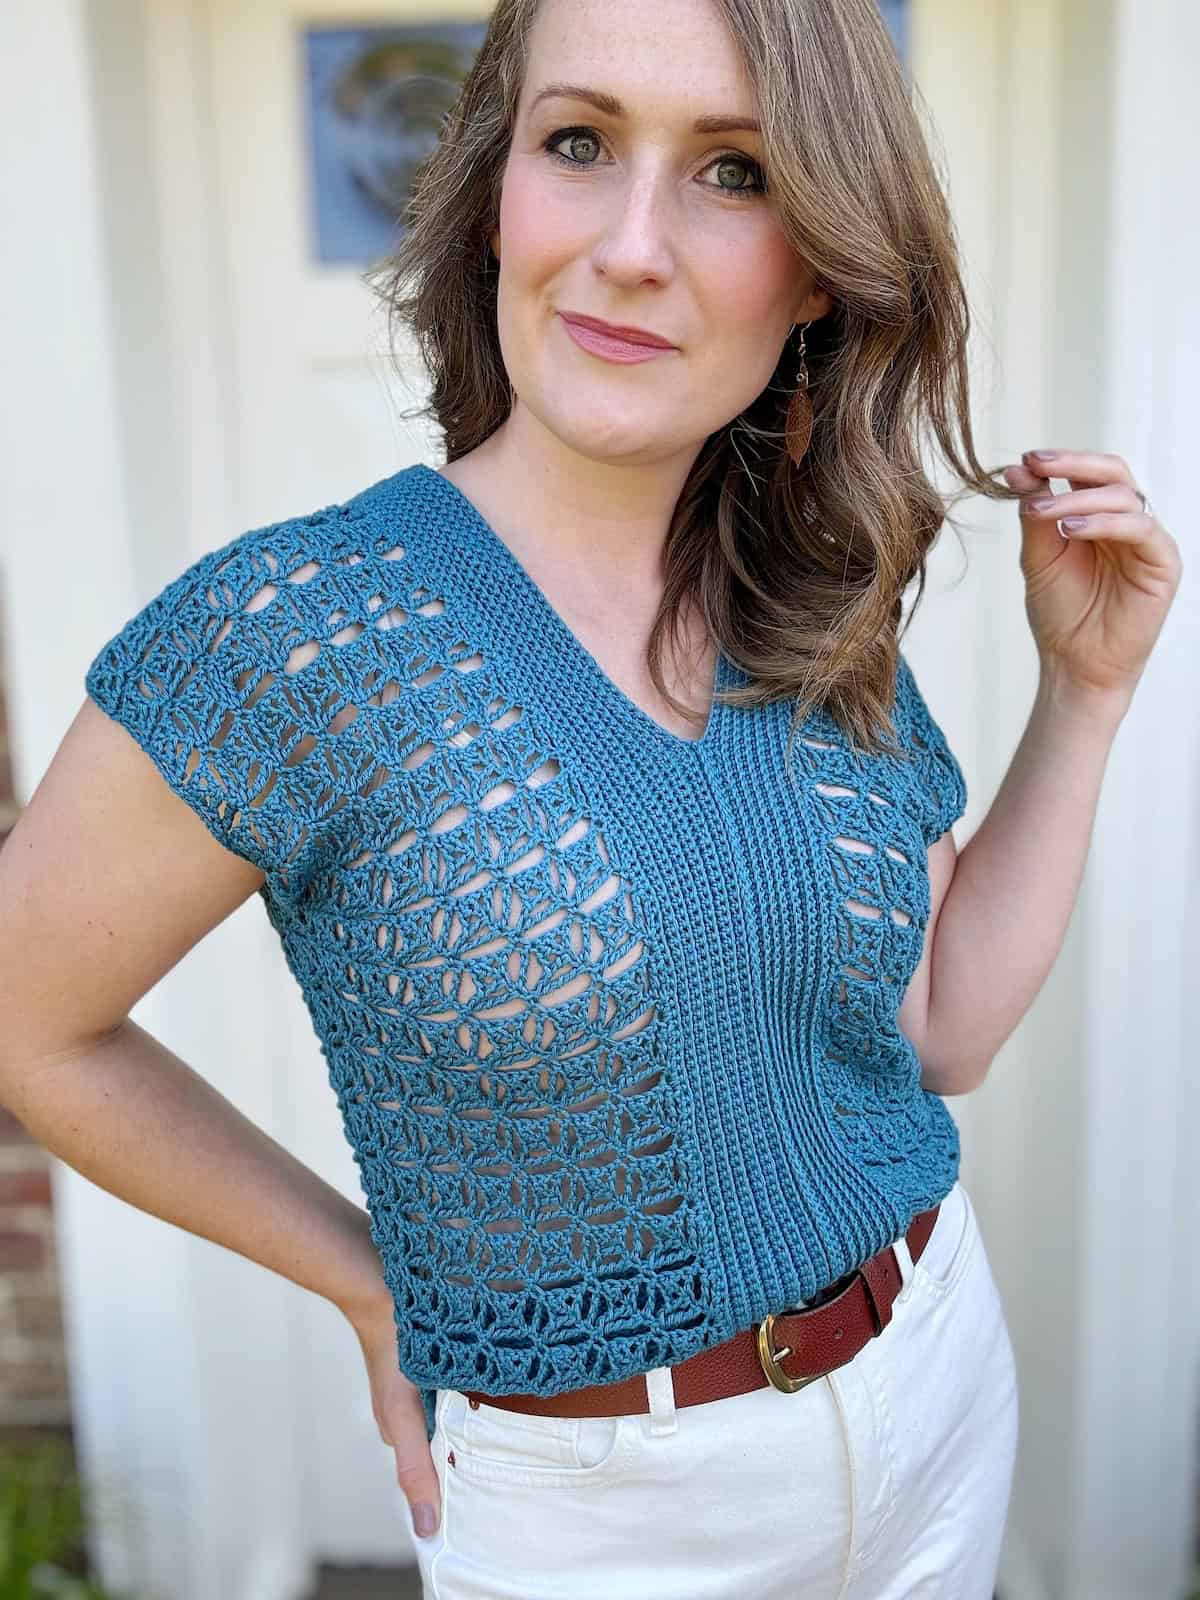 A woman stands in front of a white door, wearing a blue crocheted top with geometric patterns and white pants, holding a strand of her hair with a slight smile.